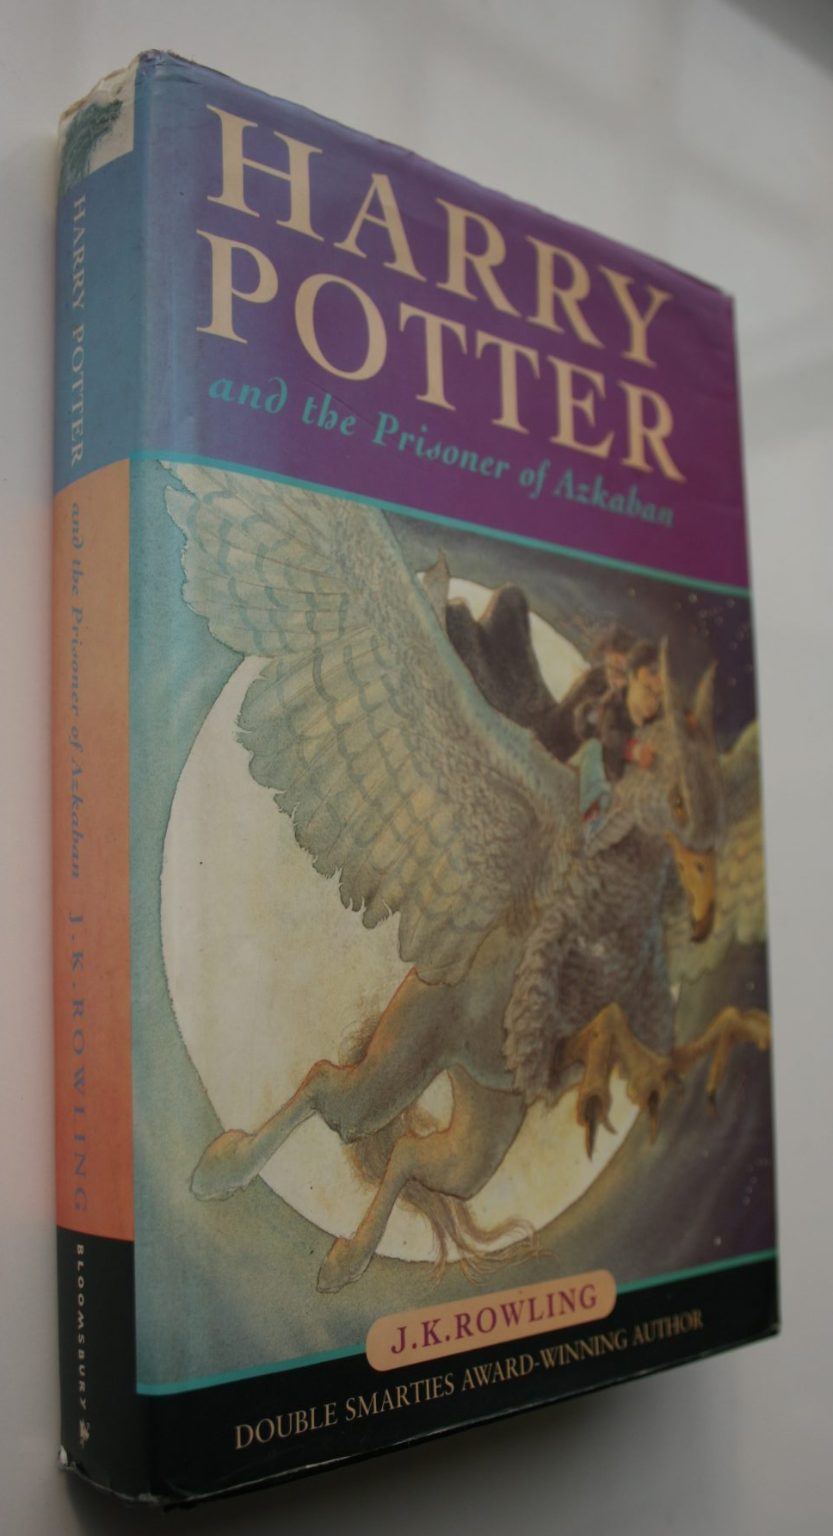 Harry Potter and the Prisoner of Azkaban by J K Rowling.  FIRST AUSTRALIAN EDITION, 4th impression.